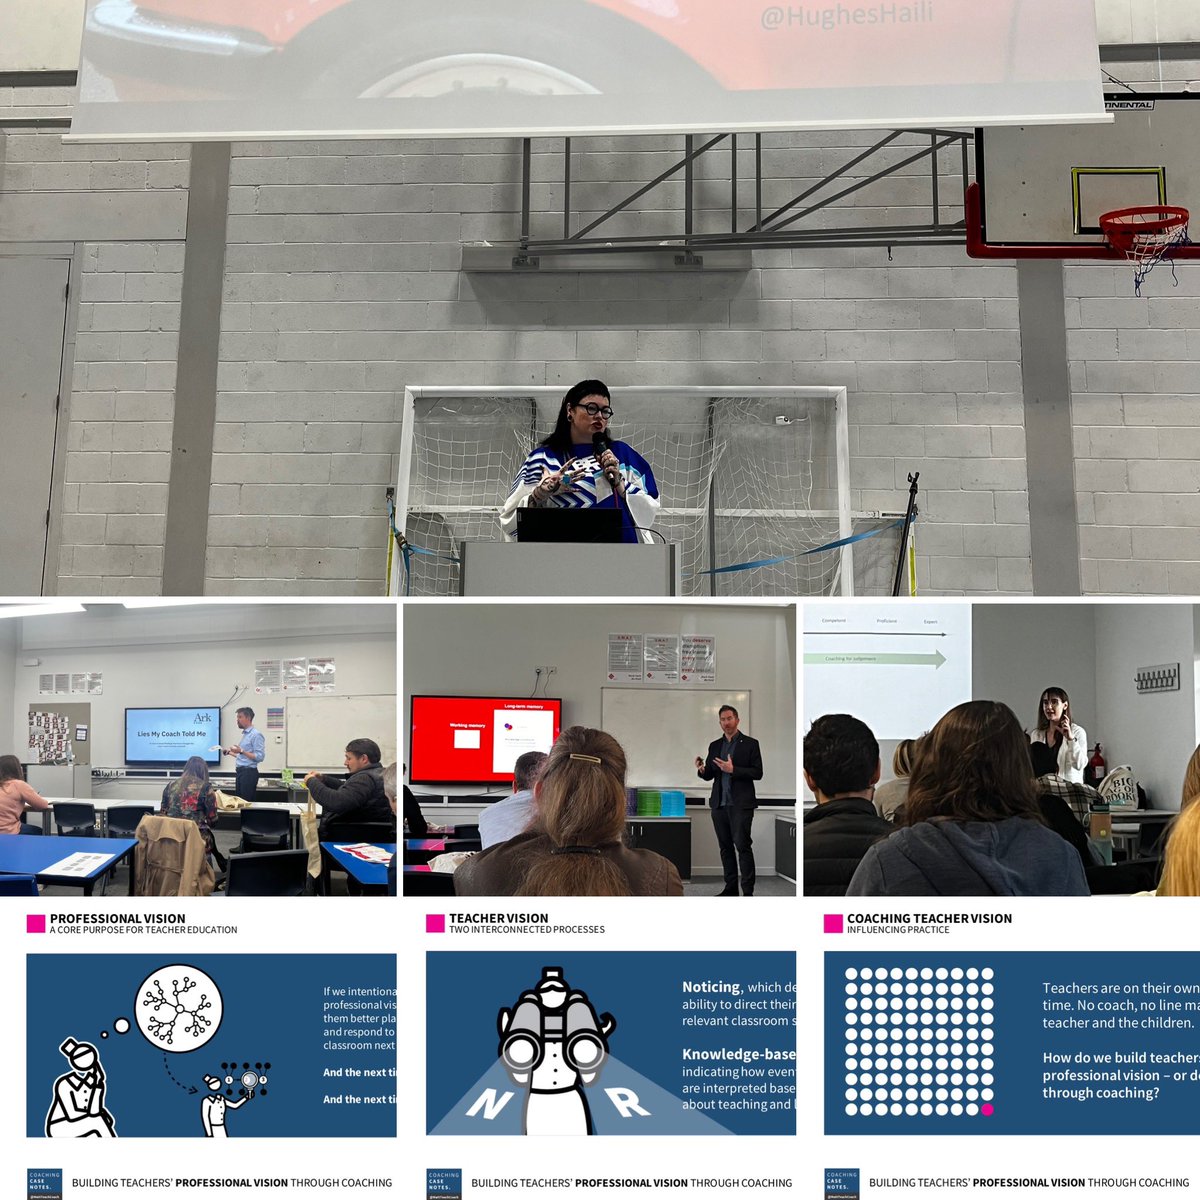 Wonderful day at @researchEDSW! Fantastic sessions from Kyle Bailey, @HughesHaili @johntomsett @SCottinghatt @Bruce_NextLevel 🤩 @researchED1 is a real force for good in education @tombennett71 - 250 teachers today… just awesome stuff.